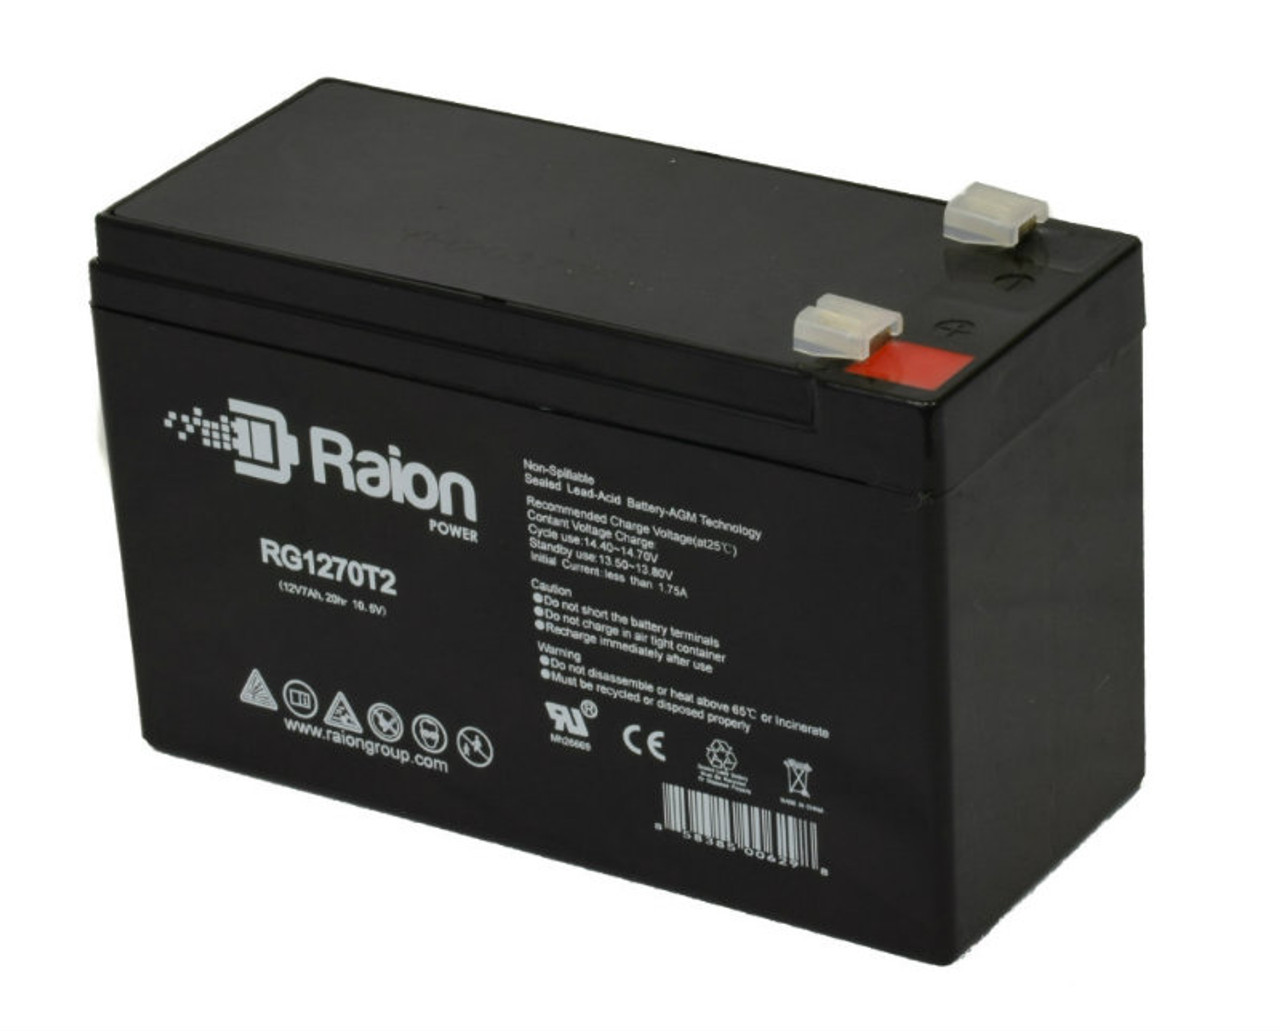 Raion Power RG1270T1 12V 7Ah Non-Spillable Replacement Battery for Panasonic LCR12V6.5PAD